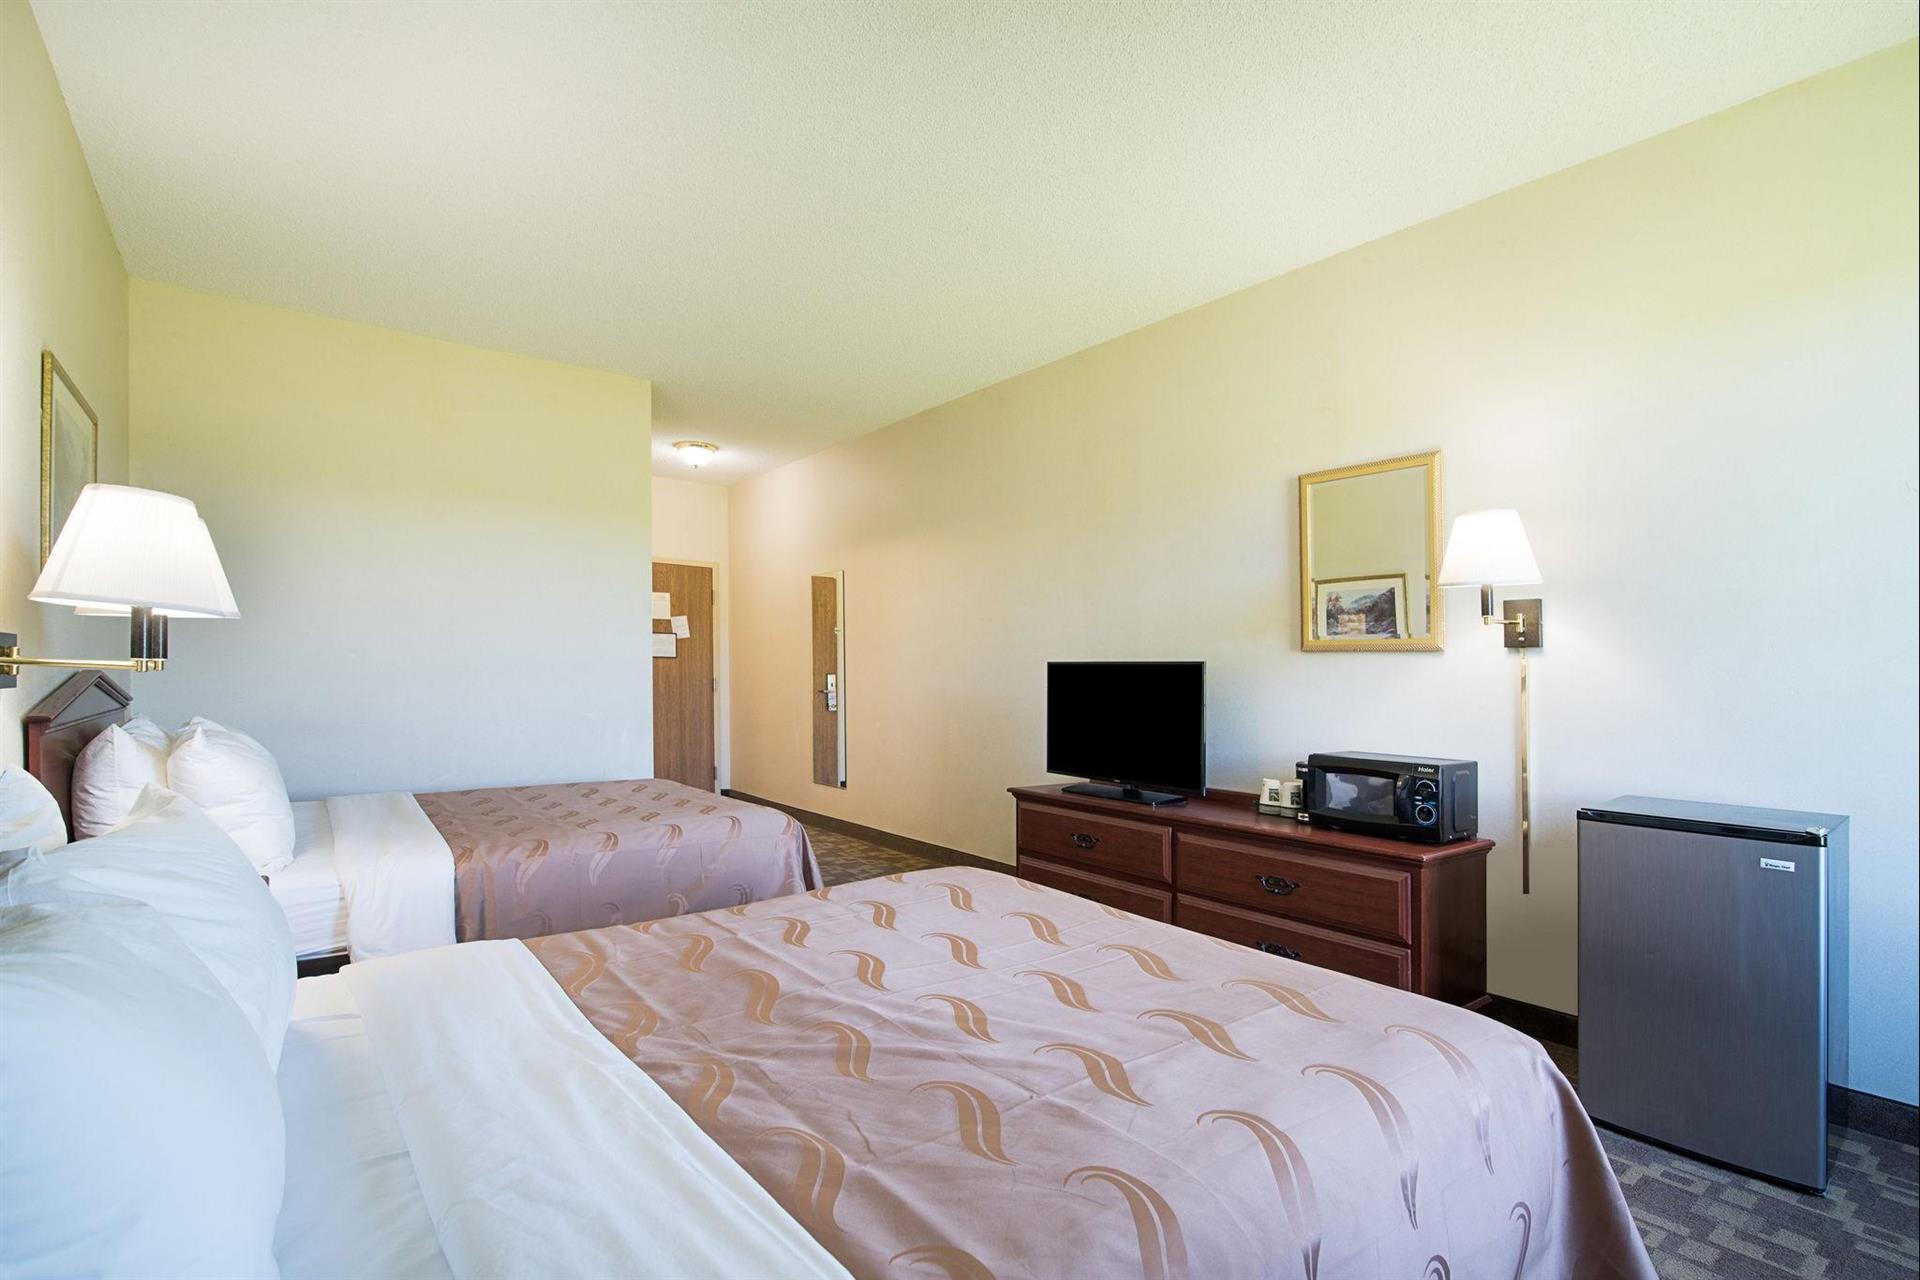 Quality Inn and Suites Schoharie near Howe Caverns in Schoharie, NY